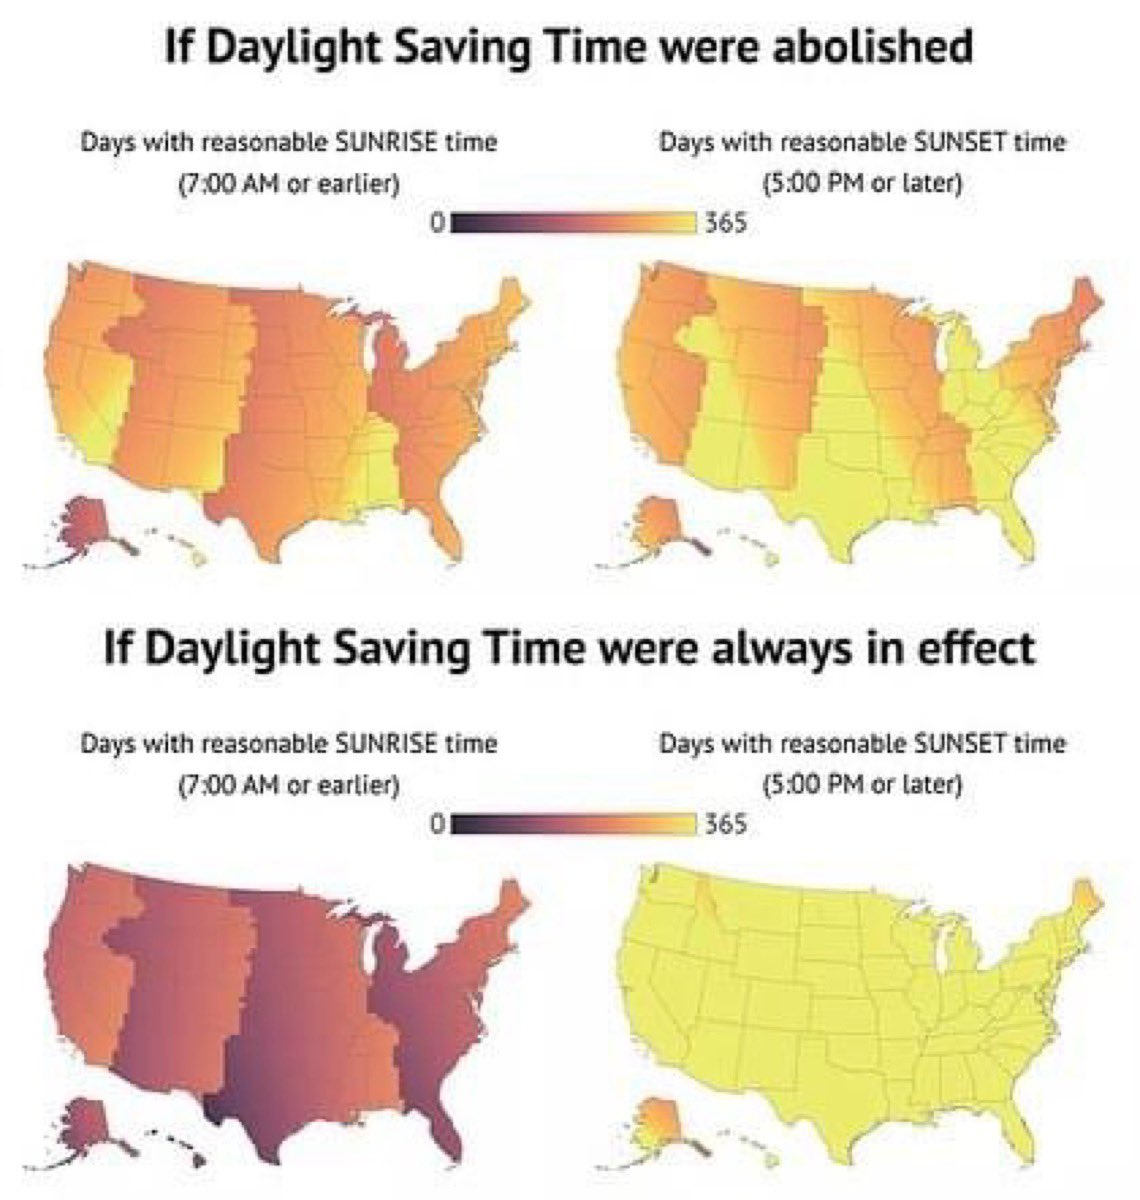 Sooooo… Just wanted to throw this out there as an FYI😳👀 #DST #DaylightSavings #LockTheClock #SaveStandardTime #DaylightSaving